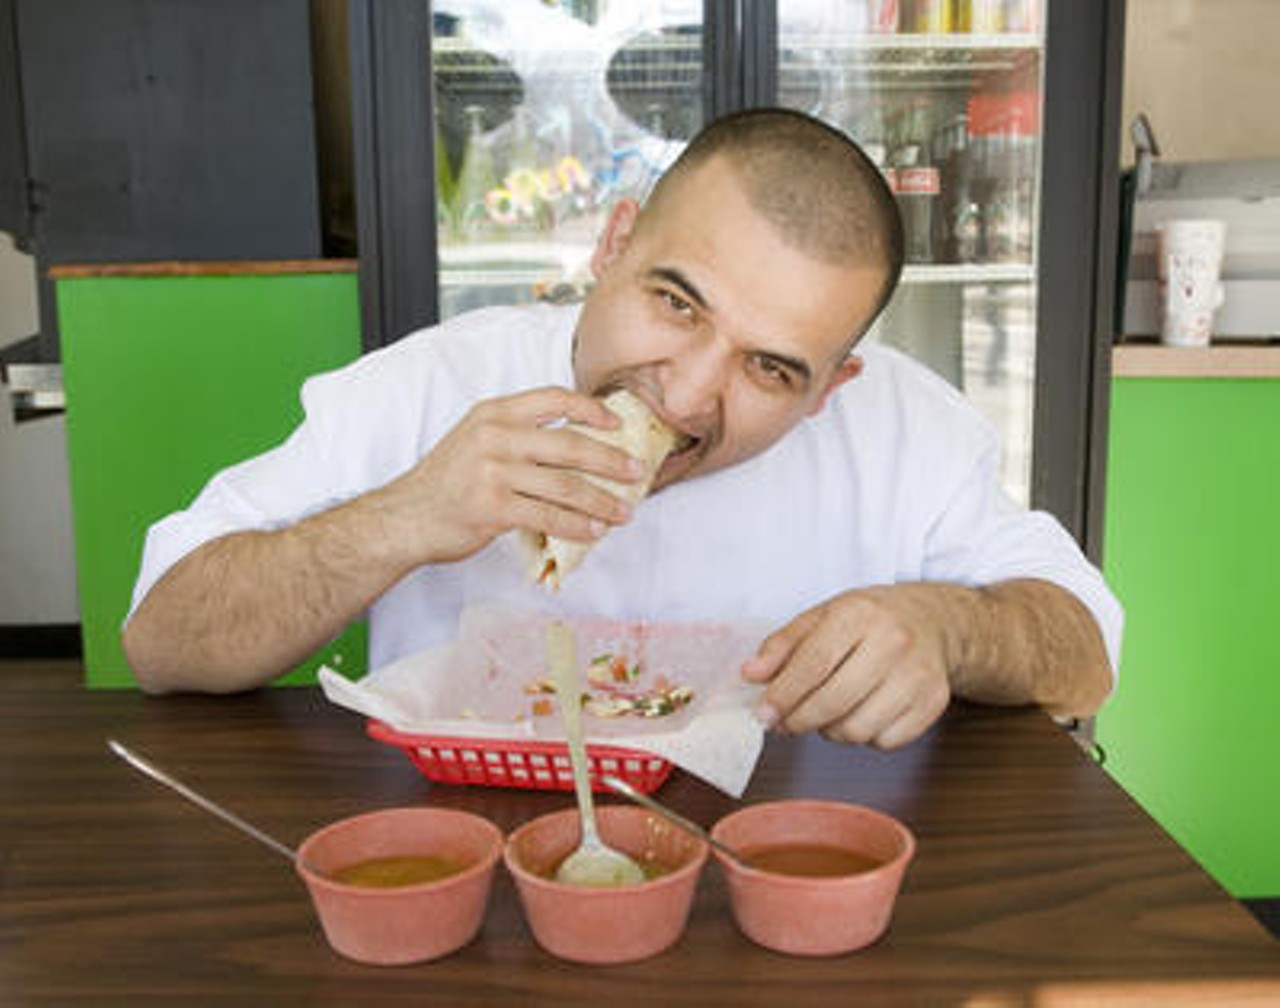 Juan Villa, owner of Taqueria El Jalape&ntilde;o in St. Ann, samples the goods in our Back of the House slide show.